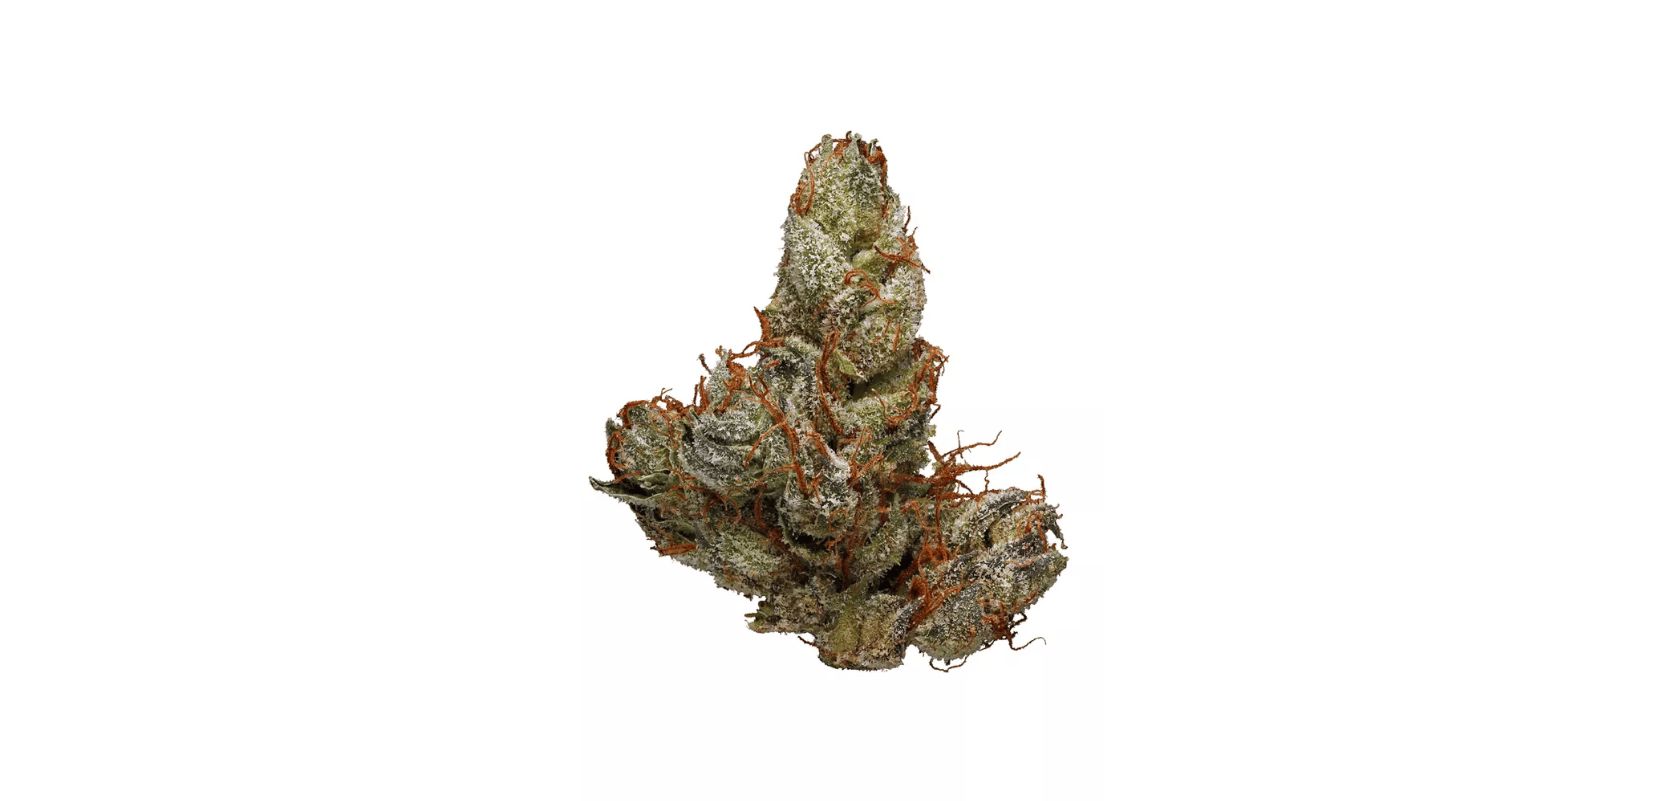 Now, let’s look at the Chemdawg strain effects in more detail so that you can decide if this bud can be your new favourite or not.